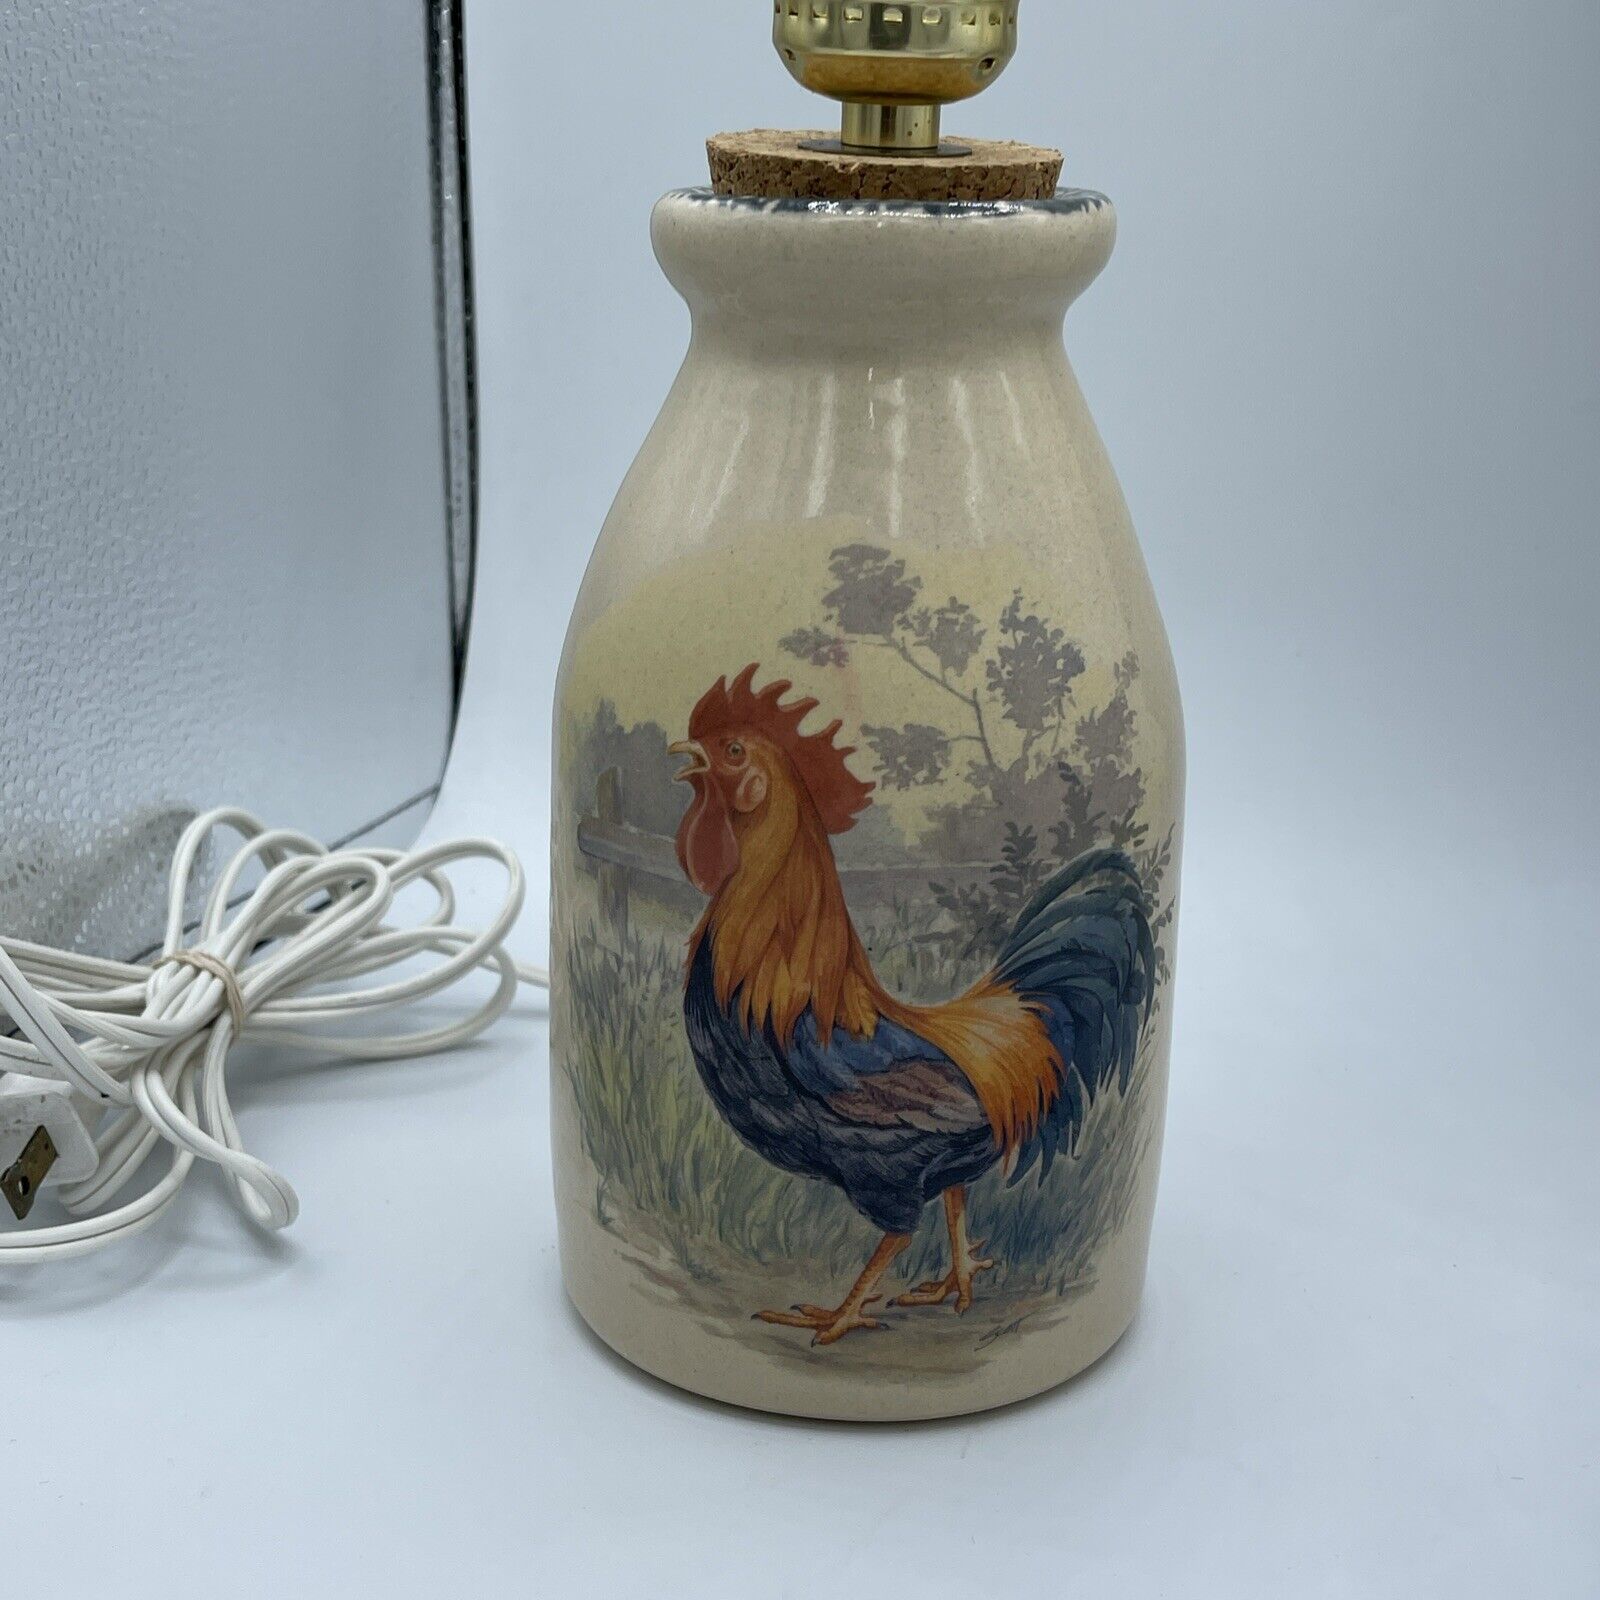 Home & Garden Party Lamp With Rooster